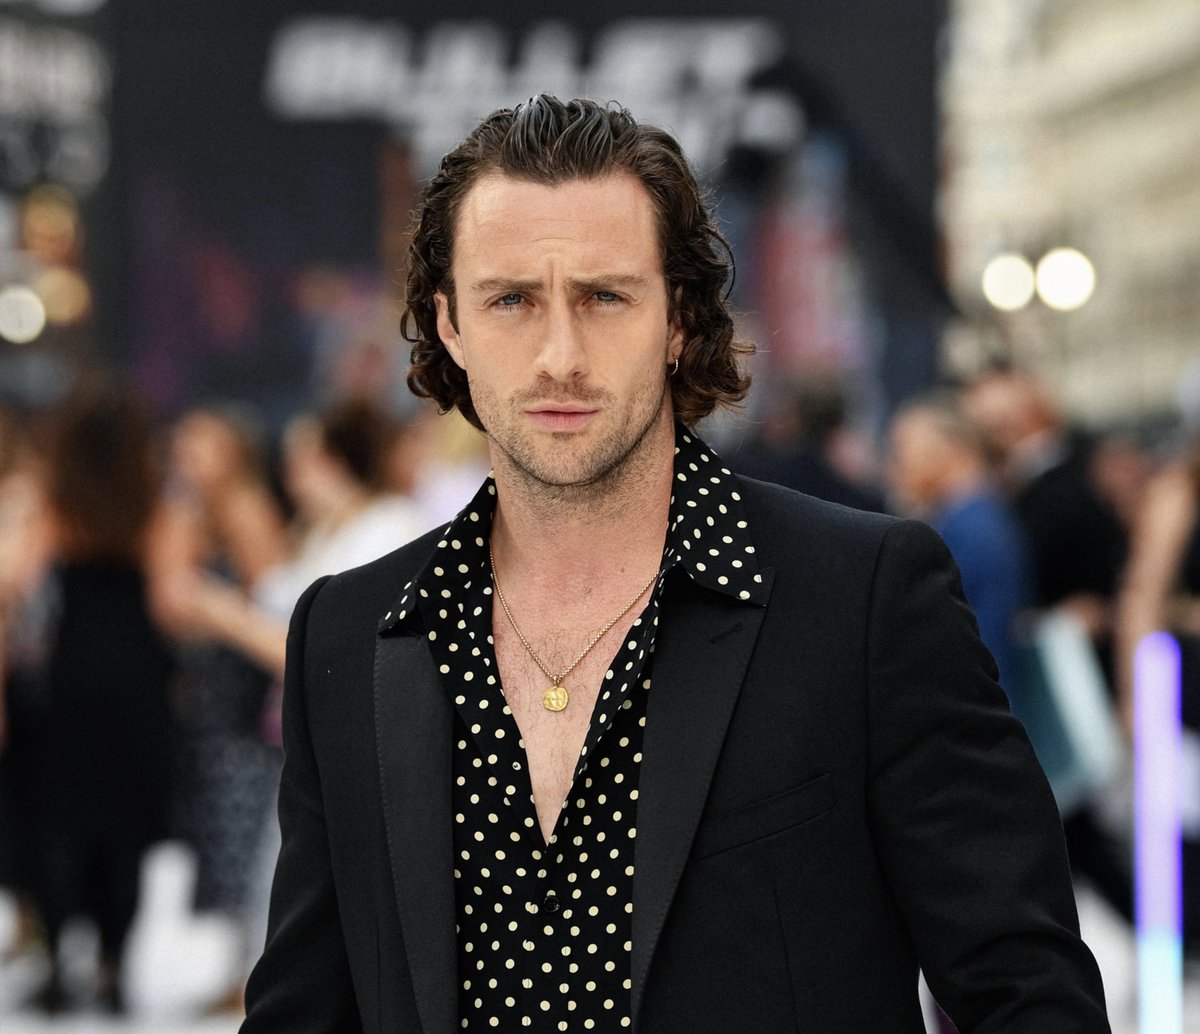 Taylor-Johnson… Aaron Taylor-Johnson has been formally offered the role of James Bond, according to multiple sources. 🍸 Thoughts on him as the next 007?